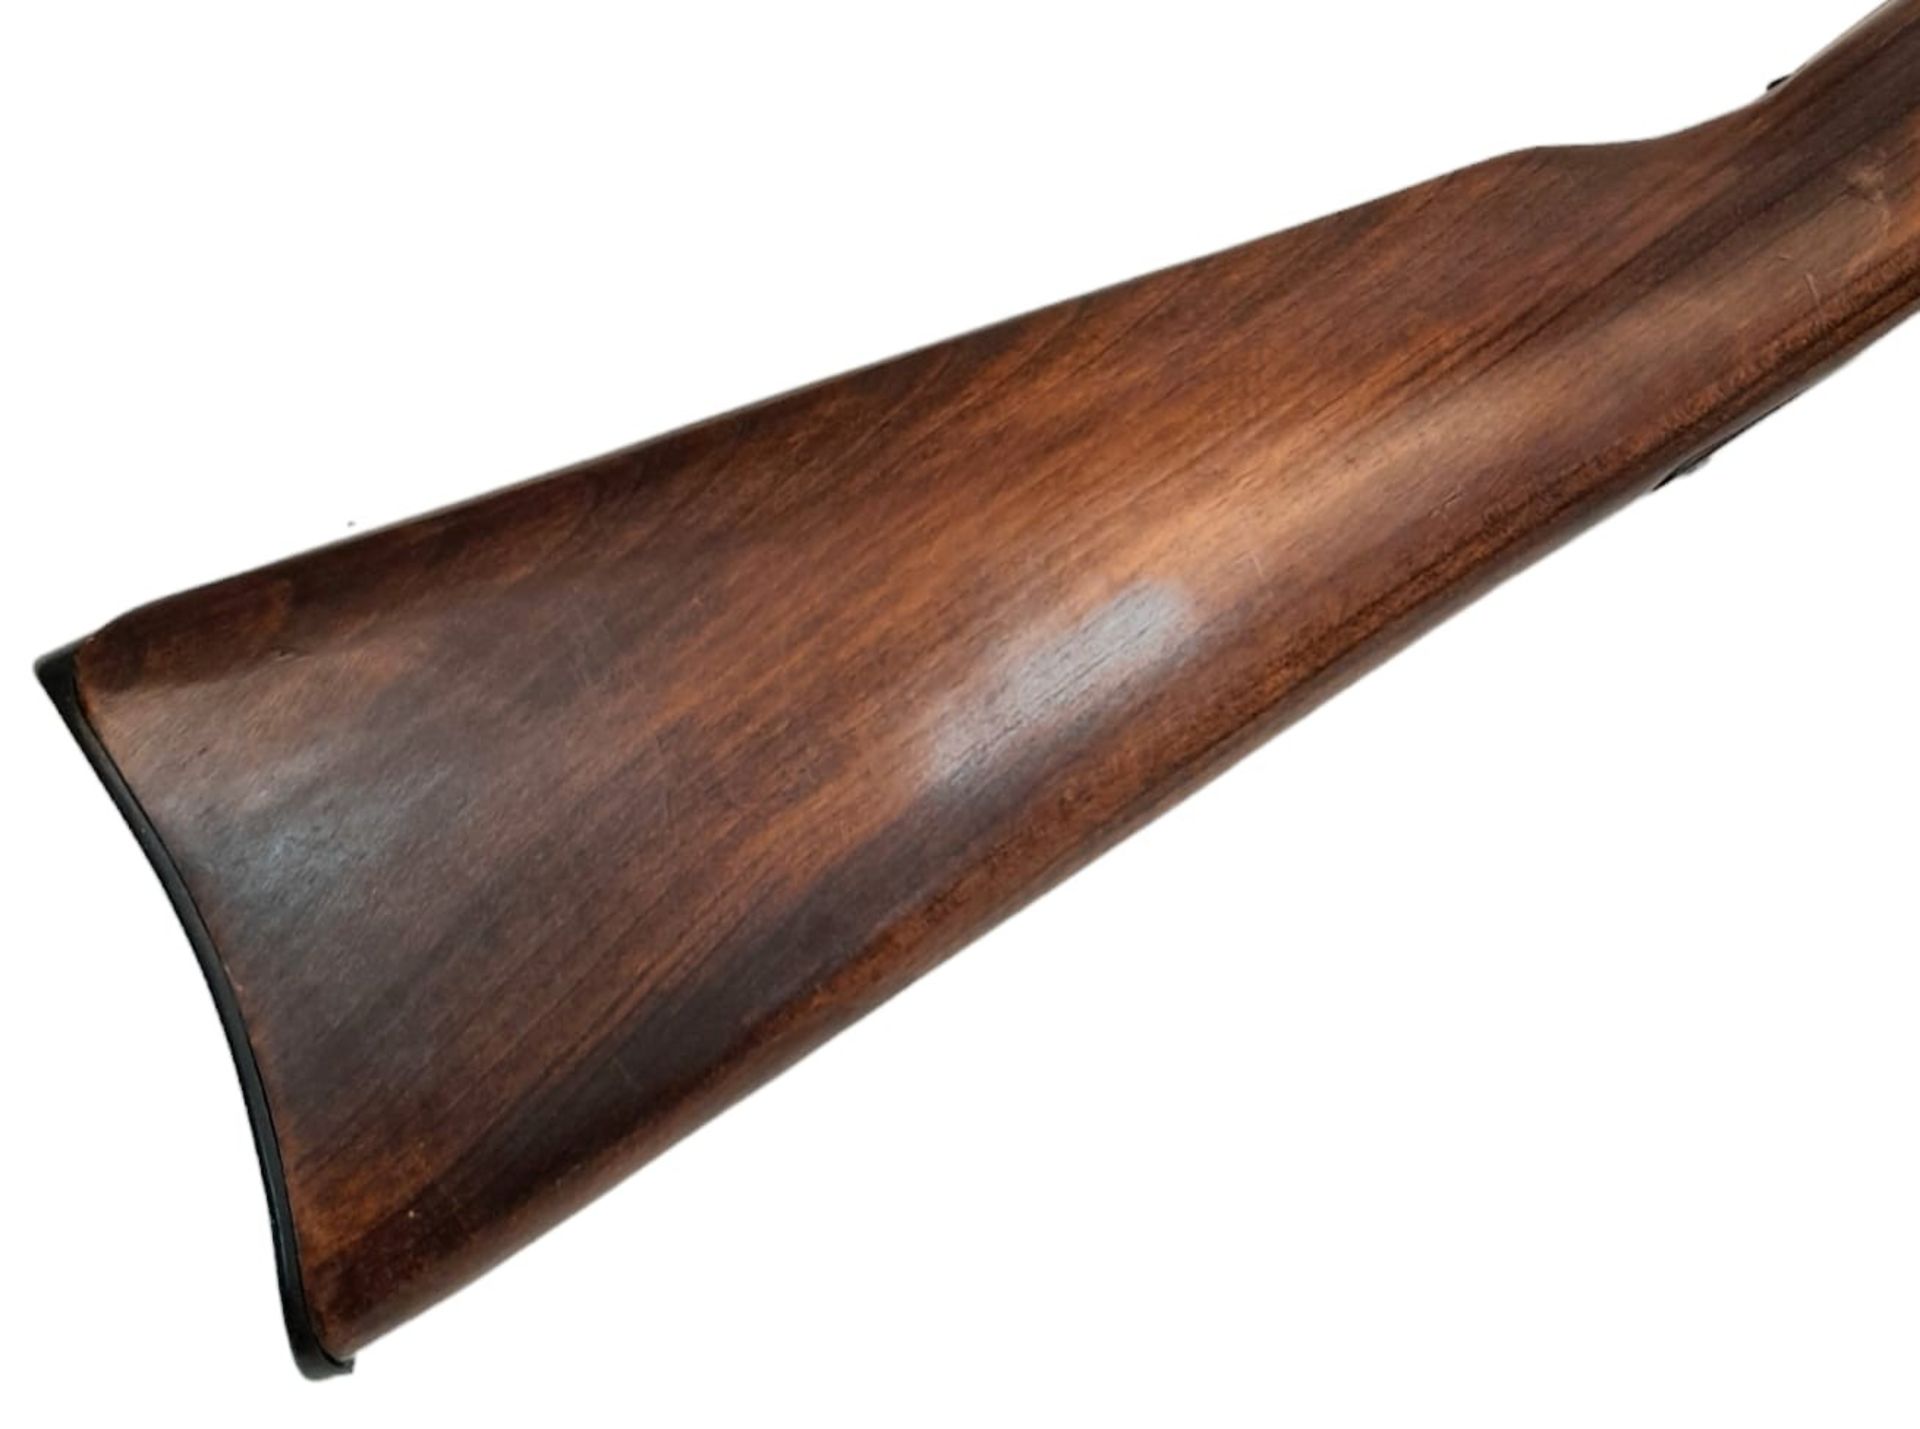 A Vintage, Full Weight and Size, Retrospective Inert Replica of an 1859 Carbine Rifle. Wood and - Image 9 of 11